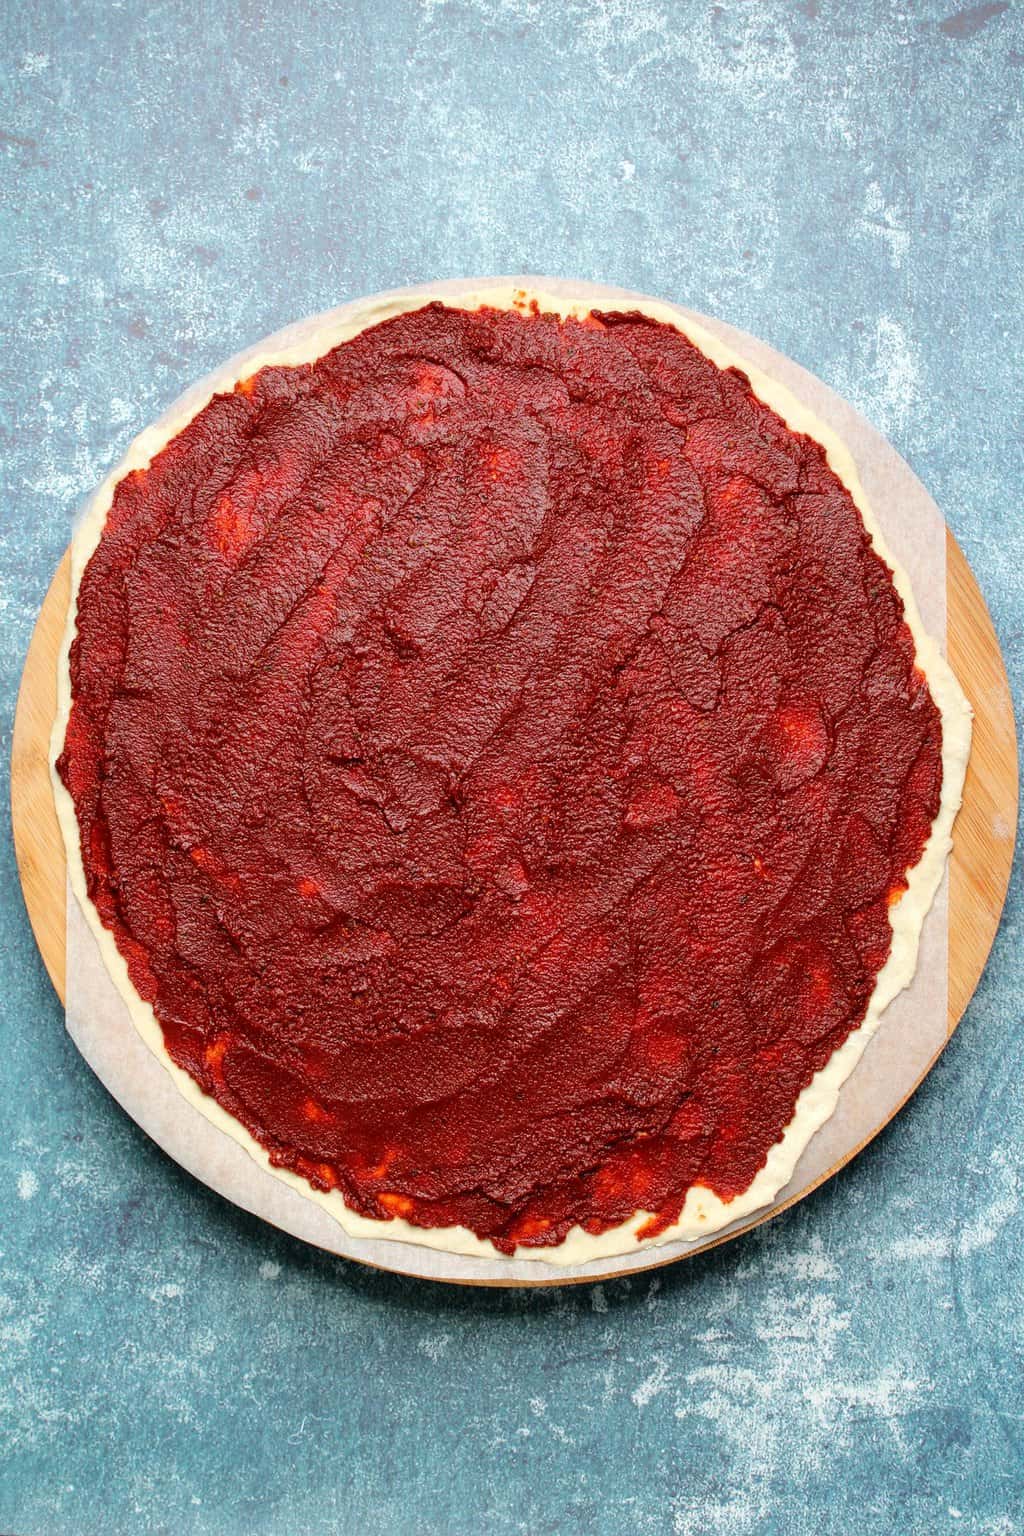 Uncooked vegan pizza base with tomato sauce. 